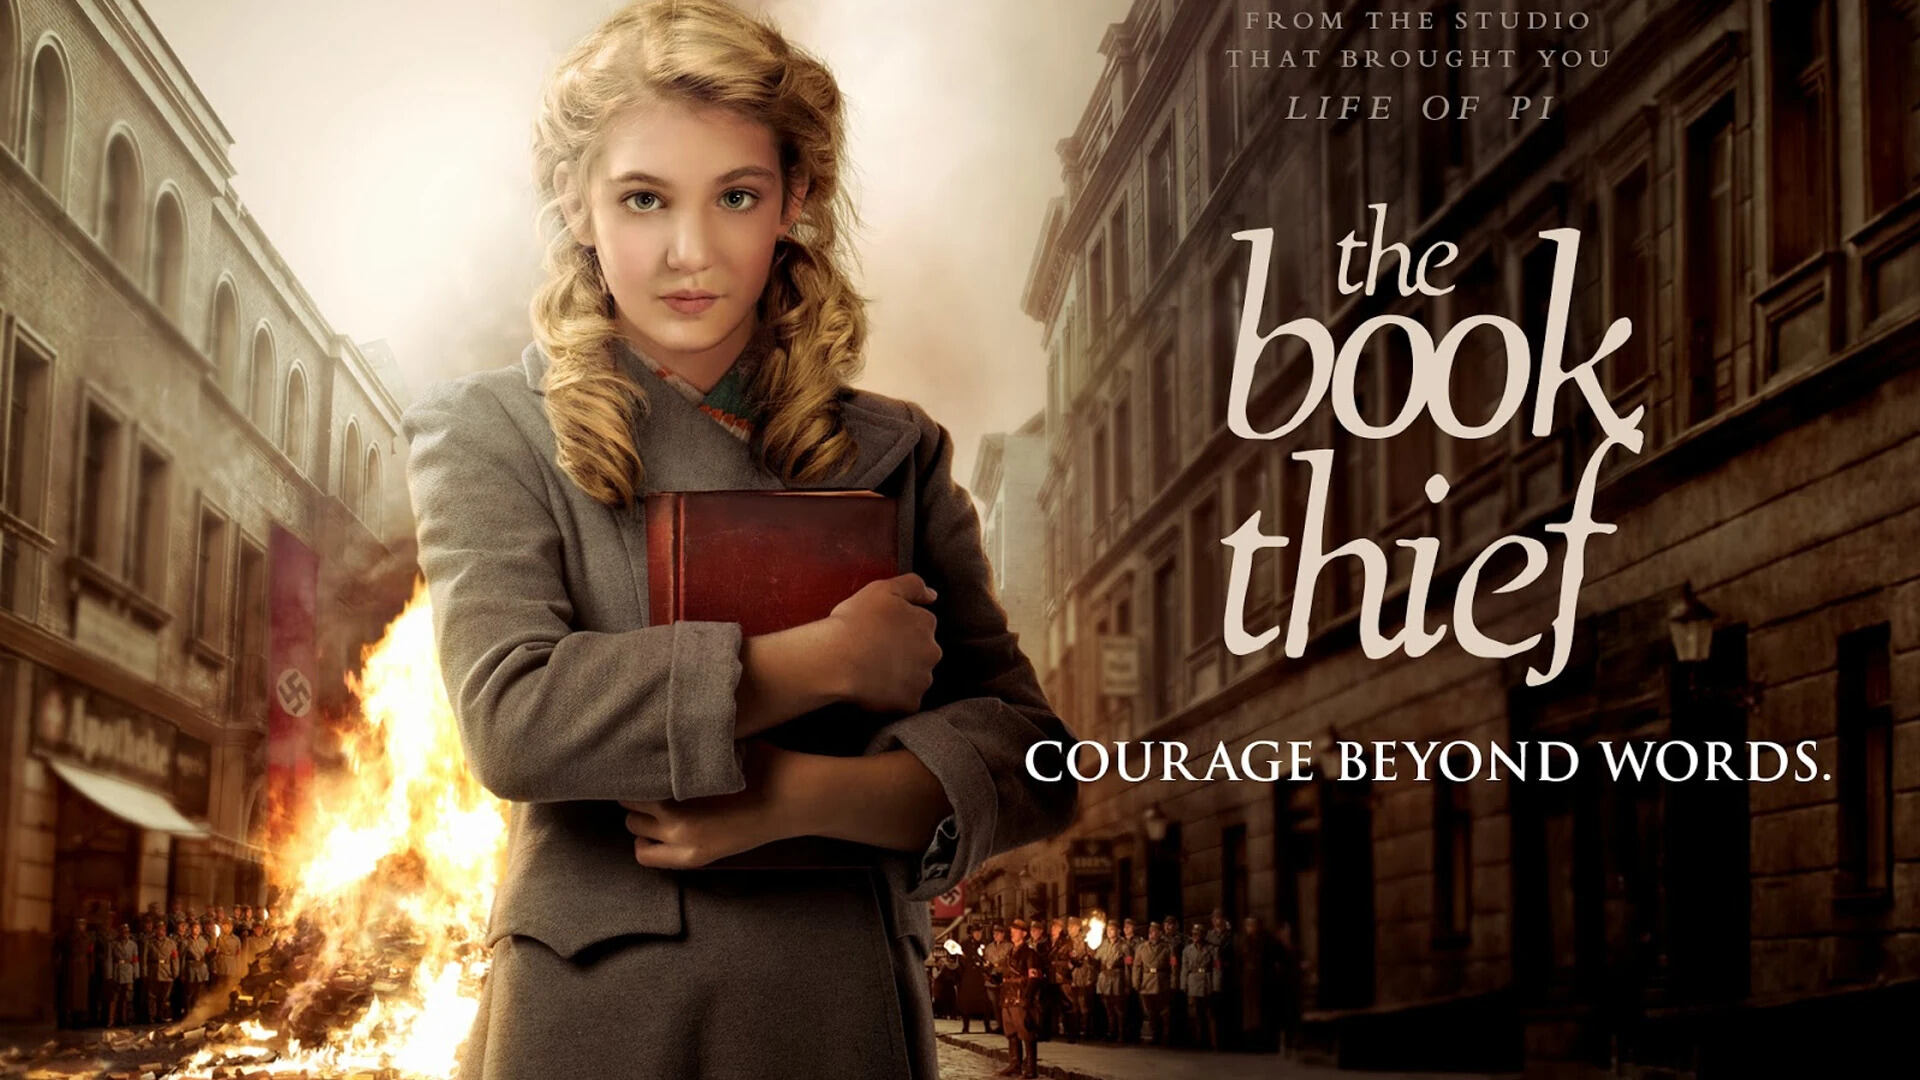 44-facts-about-the-movie-the-book-thief